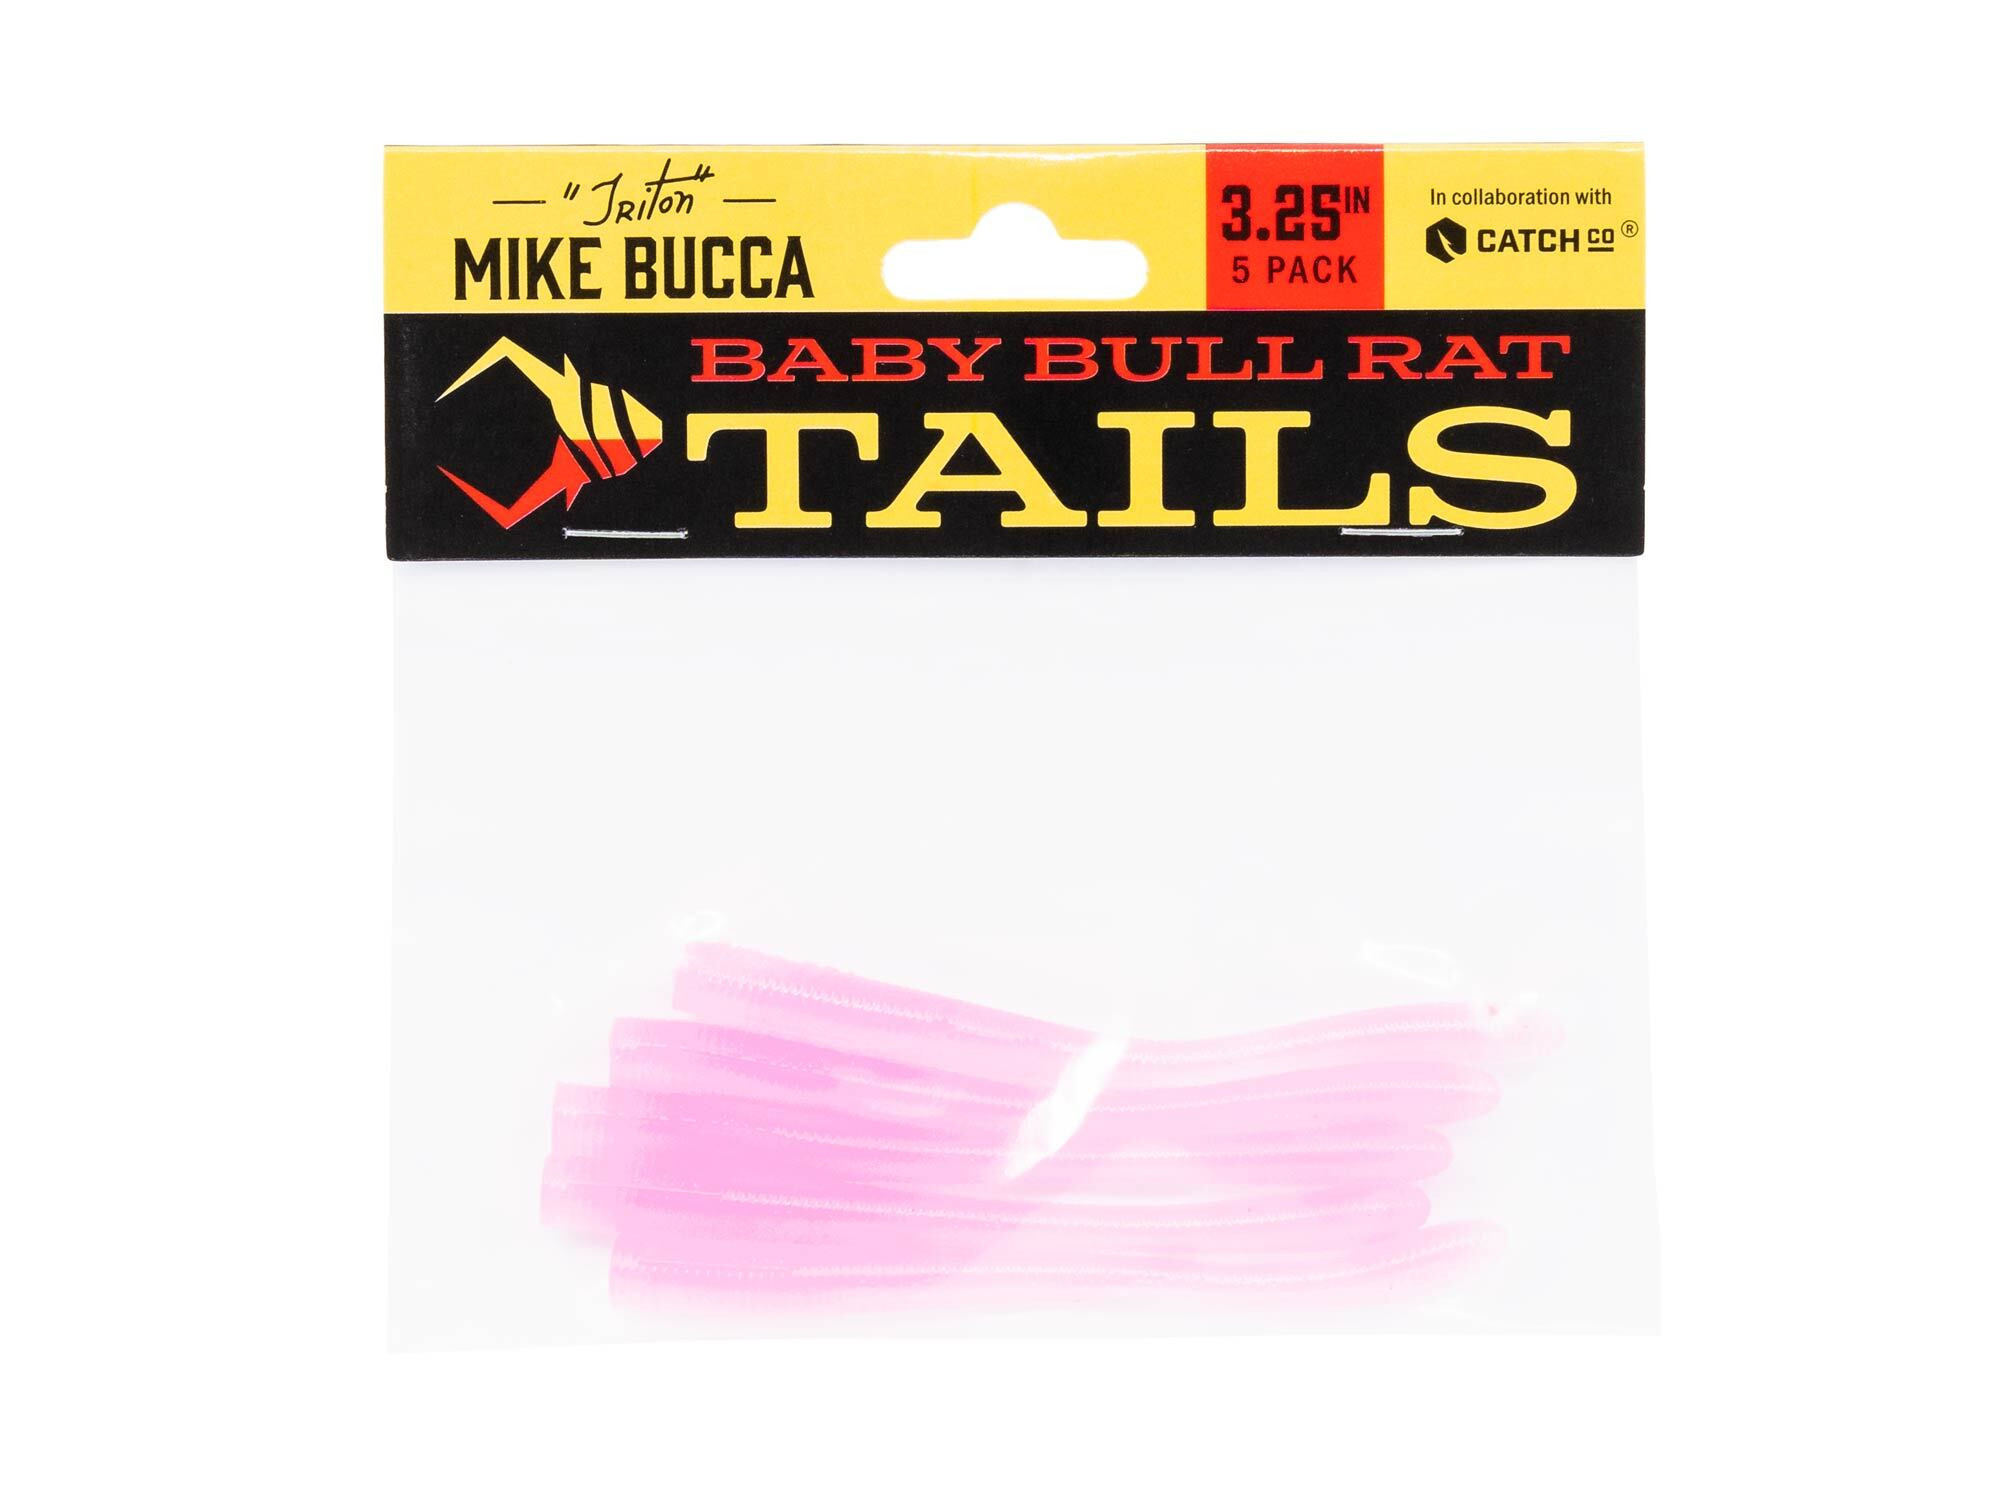 Catch Co. Mike Bucca's Baby Bull Rat Tails